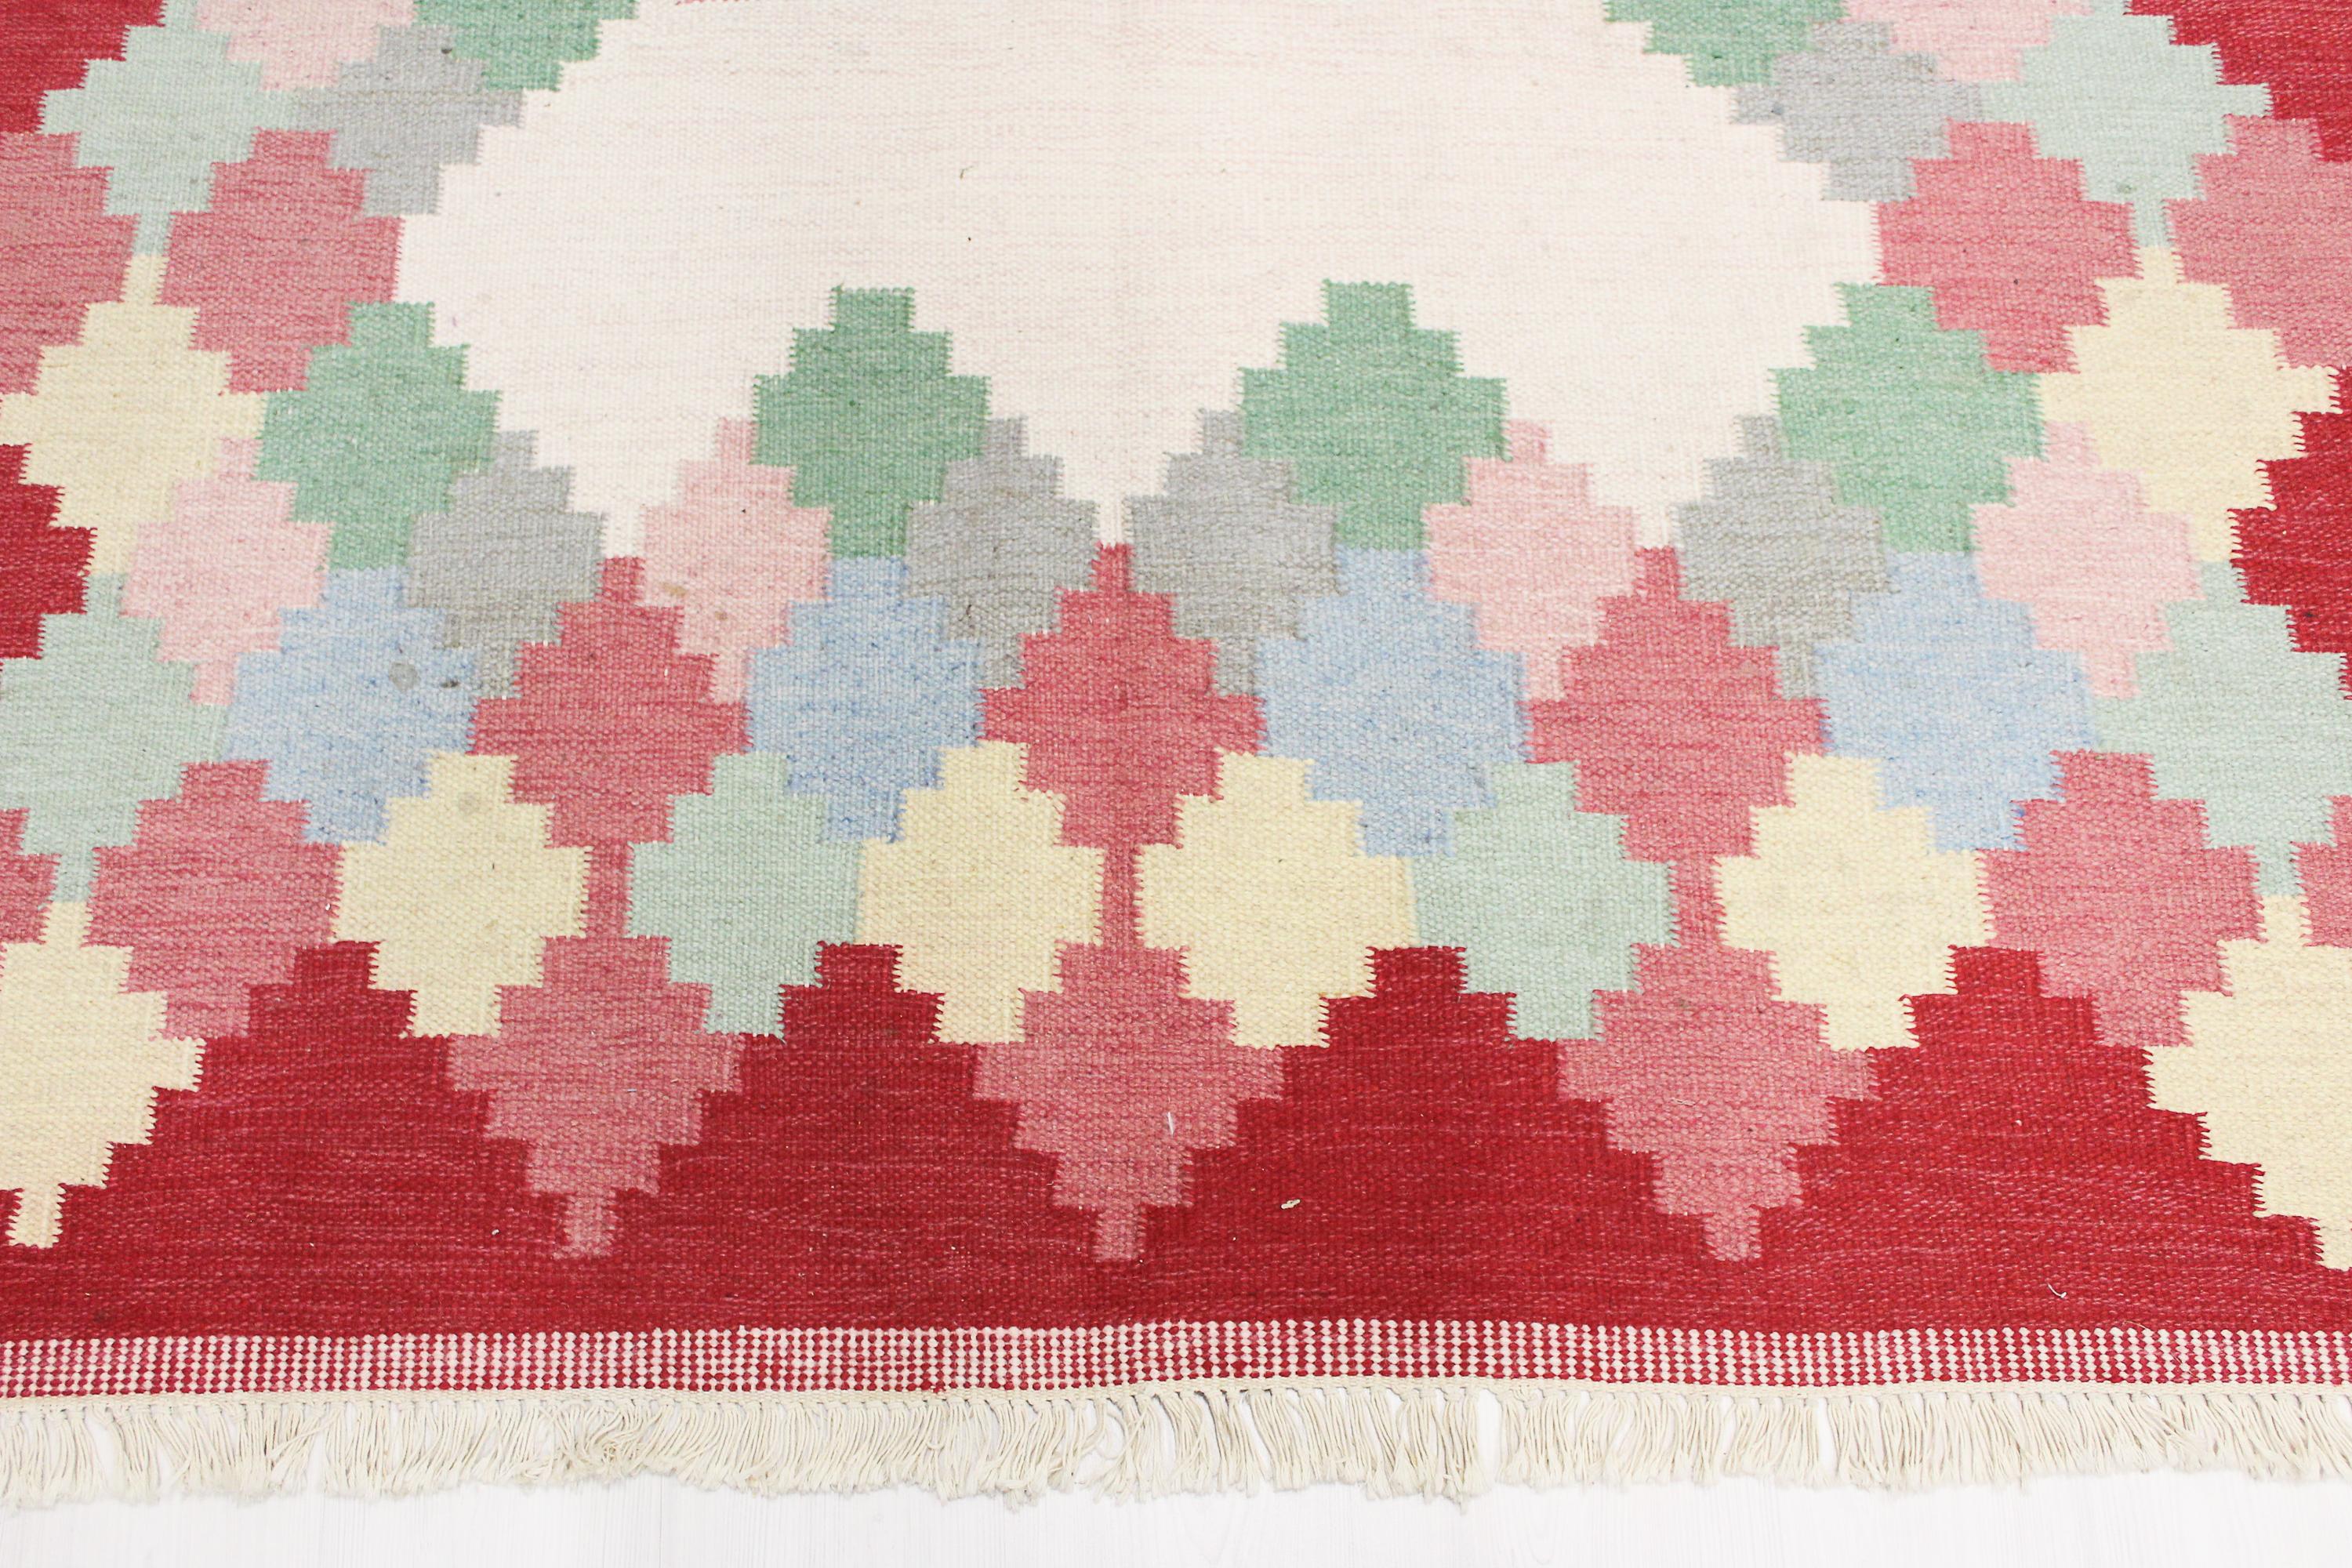 Large Midcentury Swedish Flat Weave Carpet, 1950s In Good Condition For Sale In Malmo, SE